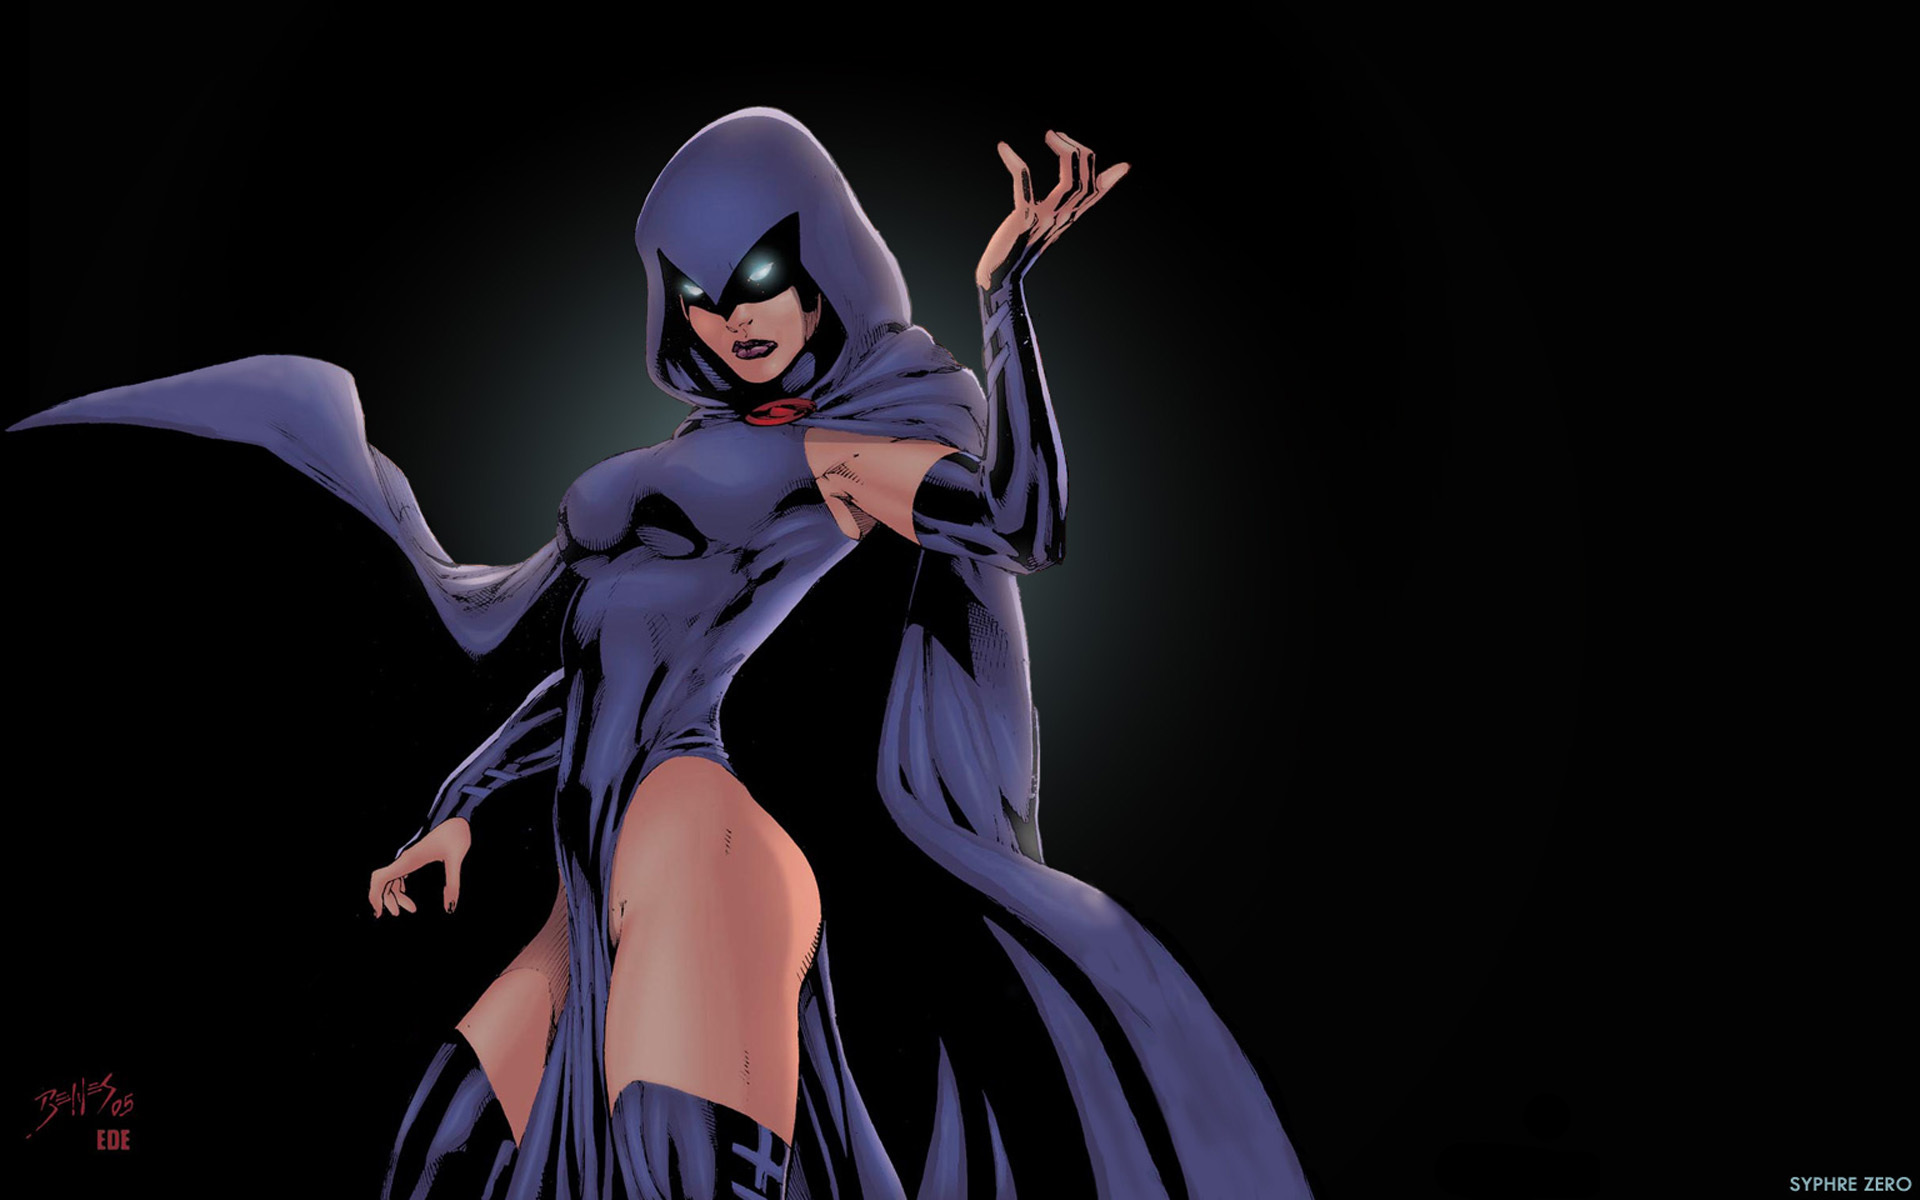  Fatales images Raven Widescreen HD wallpaper and background photos